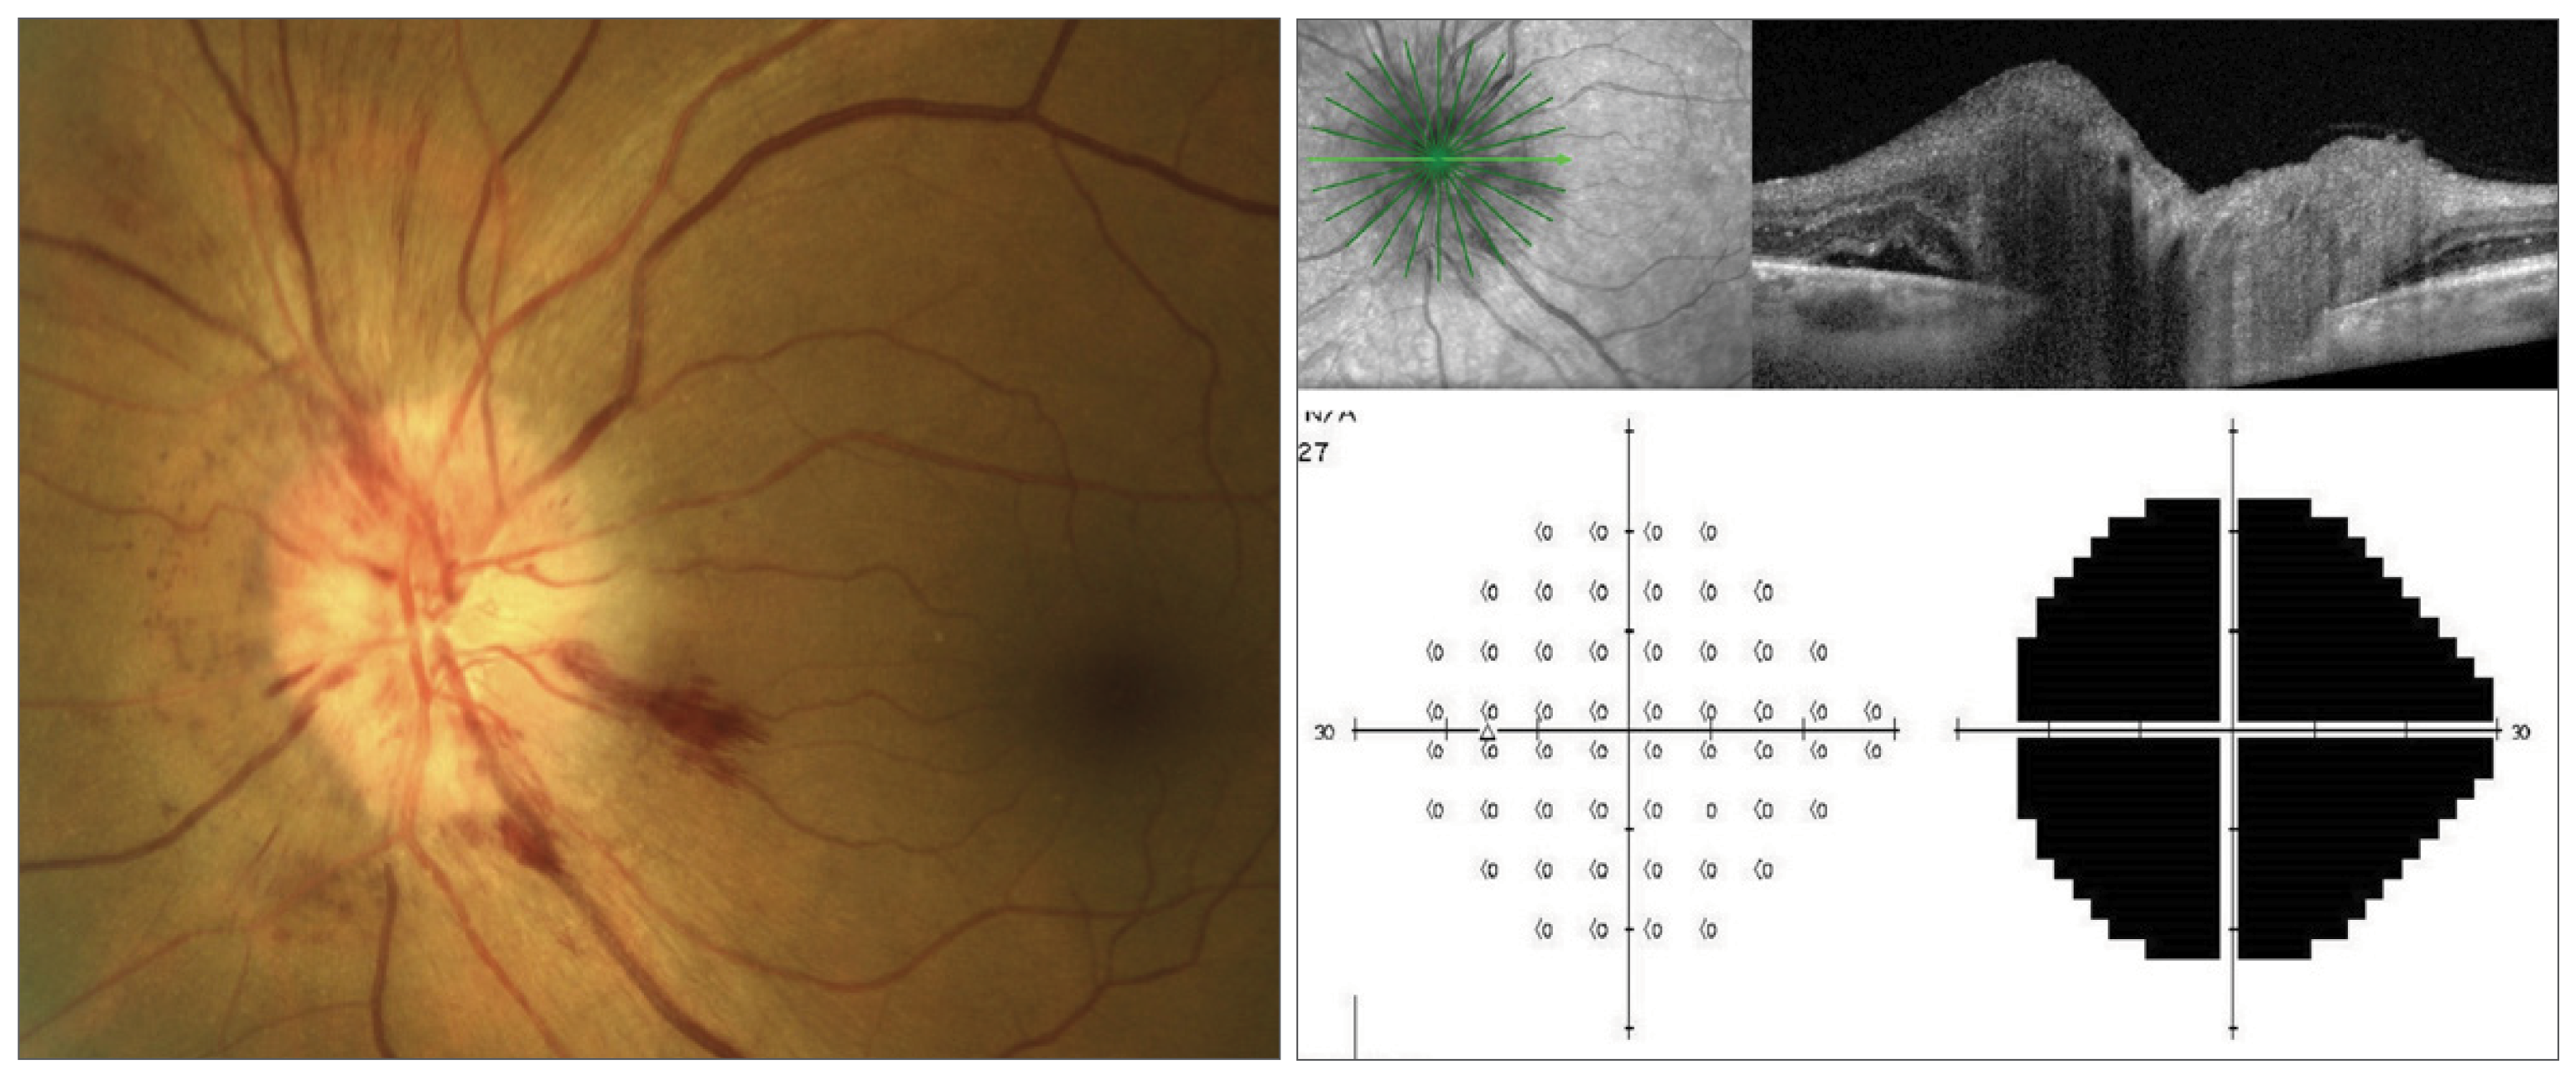 Patients with AAION generally present with poor VA, but in rare cases, they may present with normal VA, emphasizing the importance of giant cell arteritis workup in older adults with acute vision loss. 